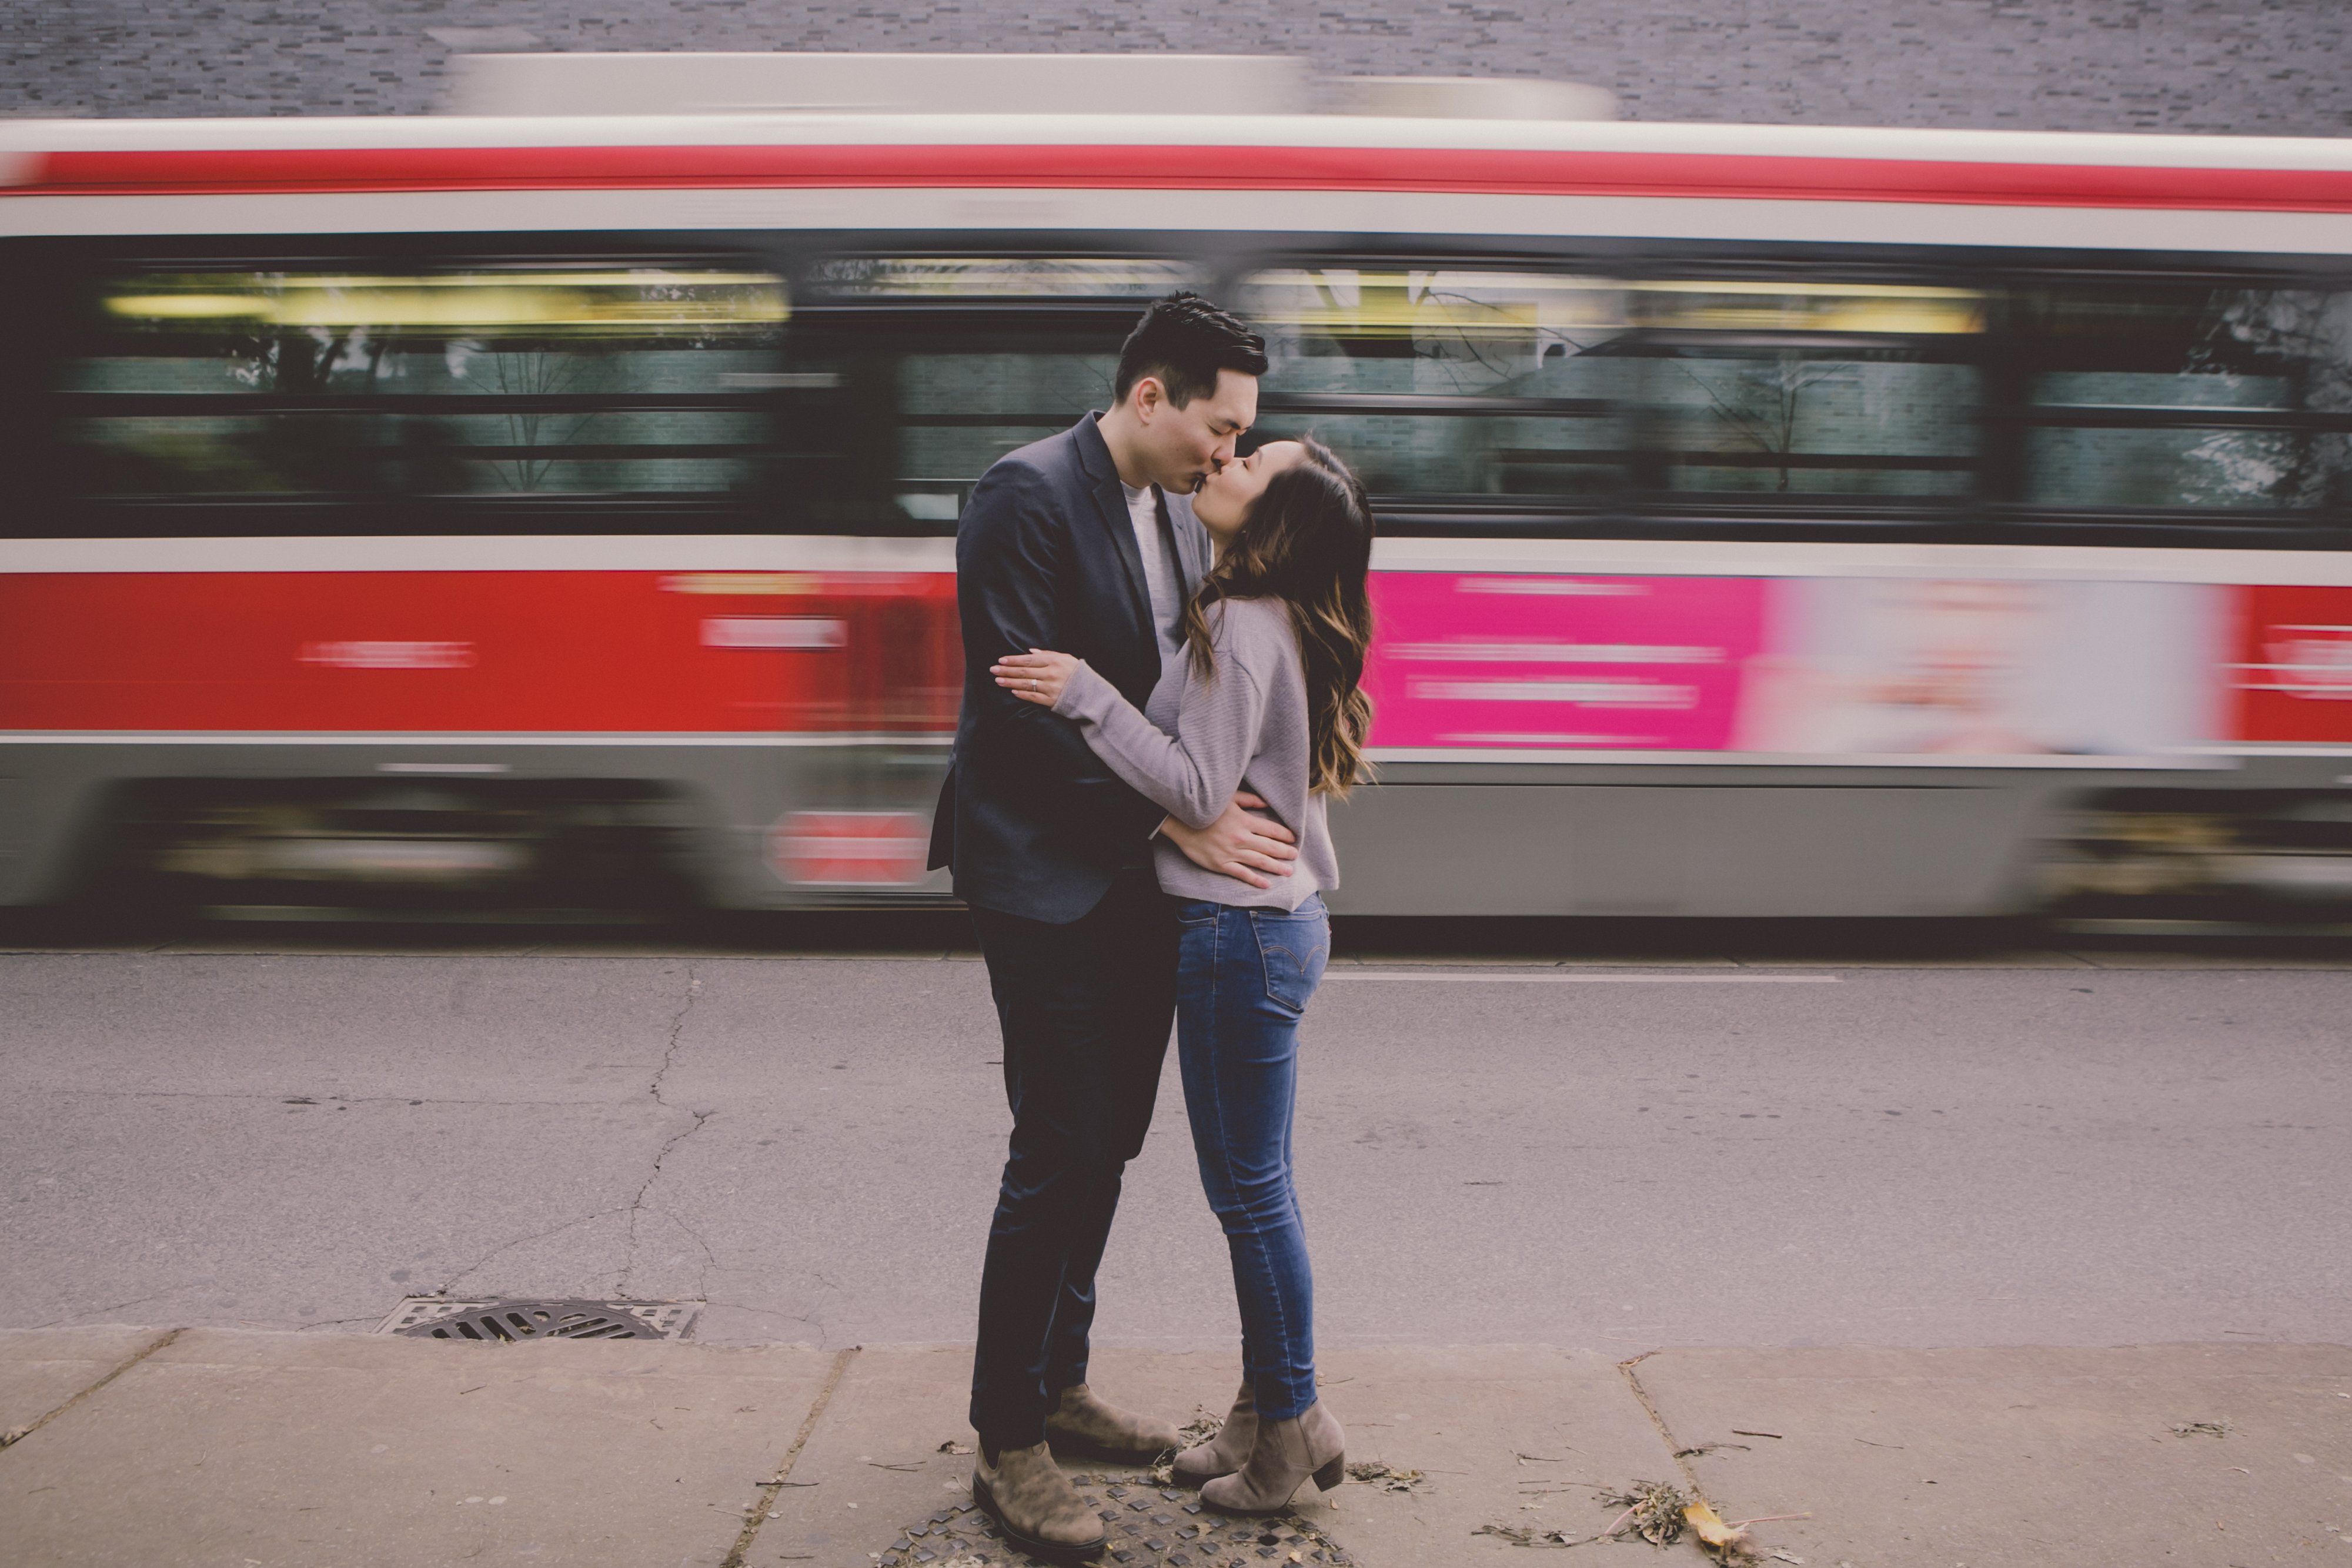 Liane & Victor, an engaged couple, kiss while a streetcar zooms by in the background. 